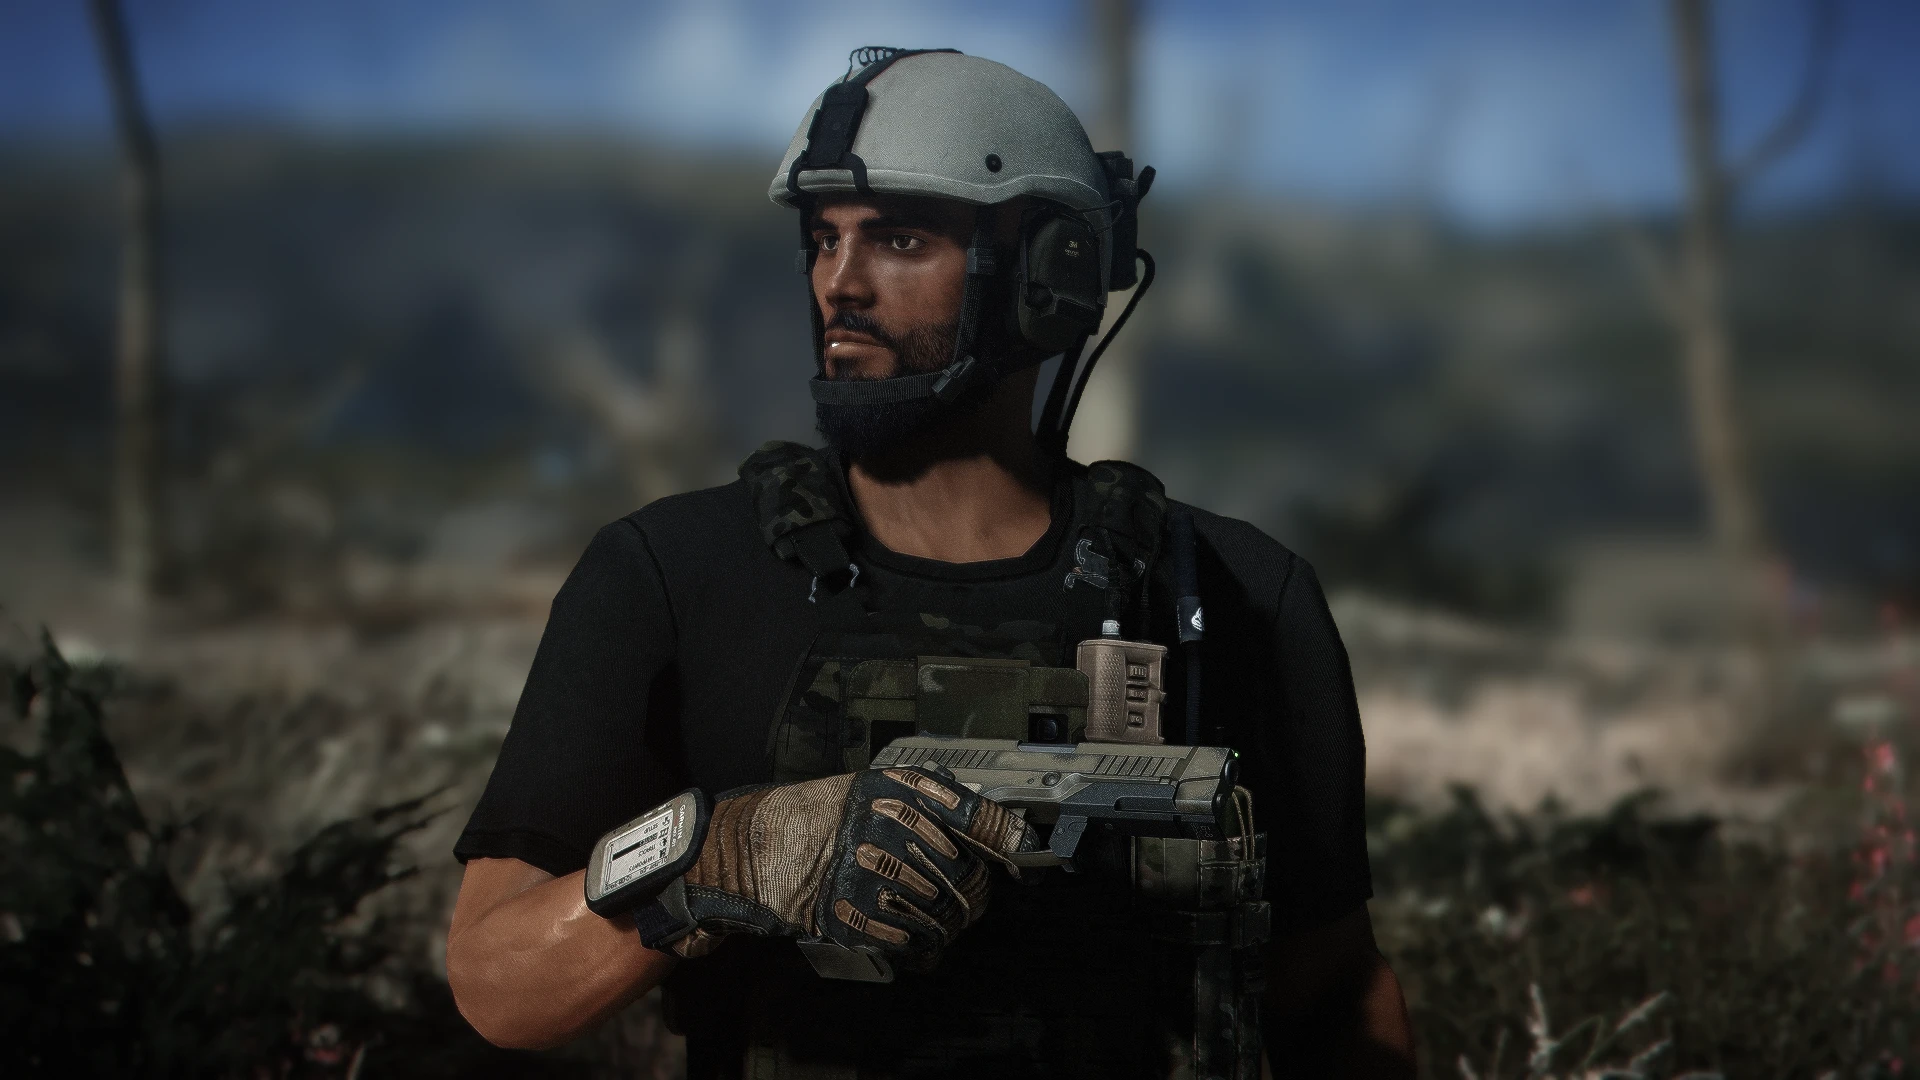 GiC's - MICH High Cut Helmet at Fallout 4 Nexus - Mods and community